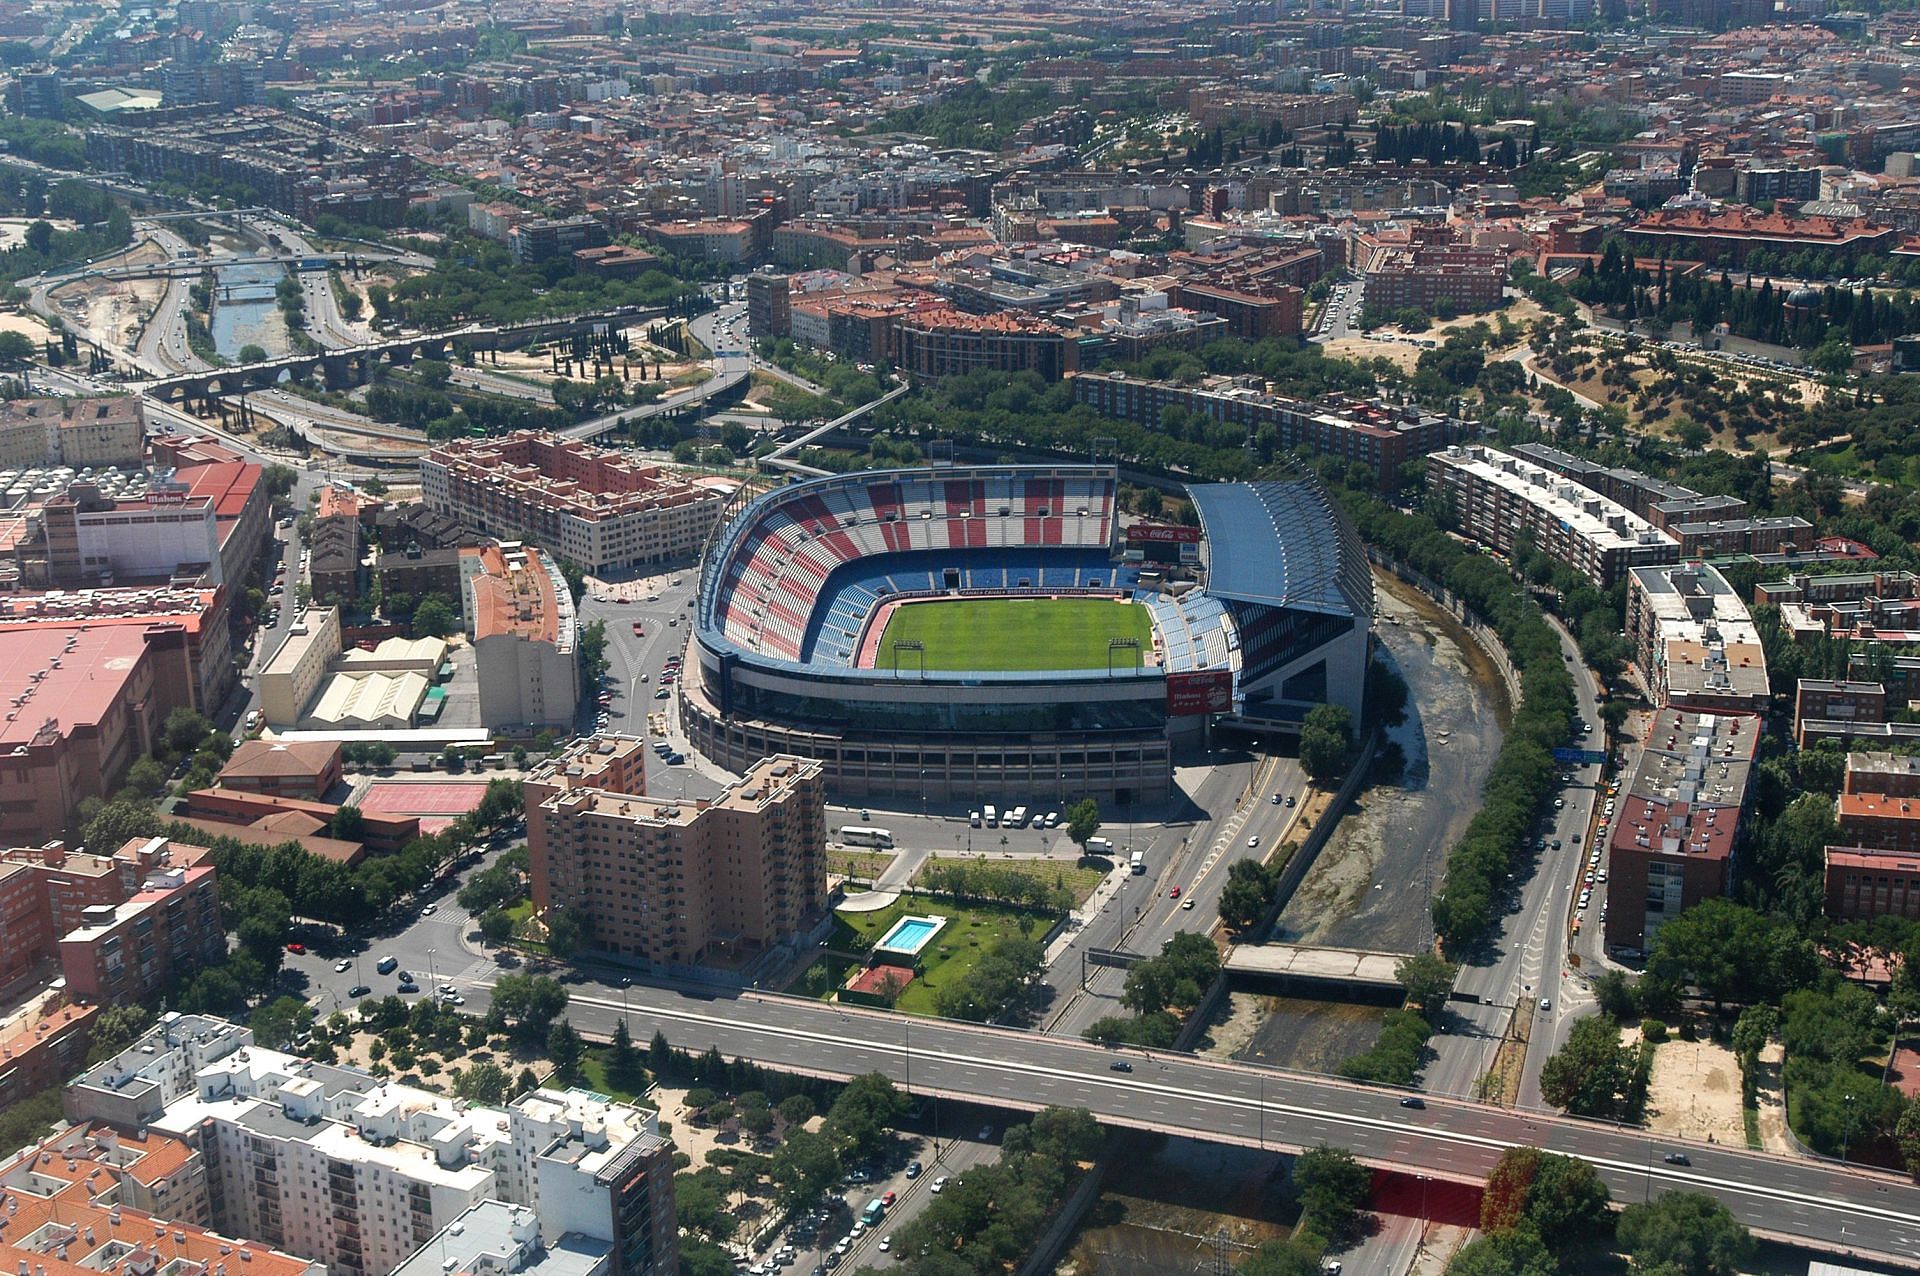 The M-30 dual carriageway passed through one of the stands of Vicente Calderon Stadium